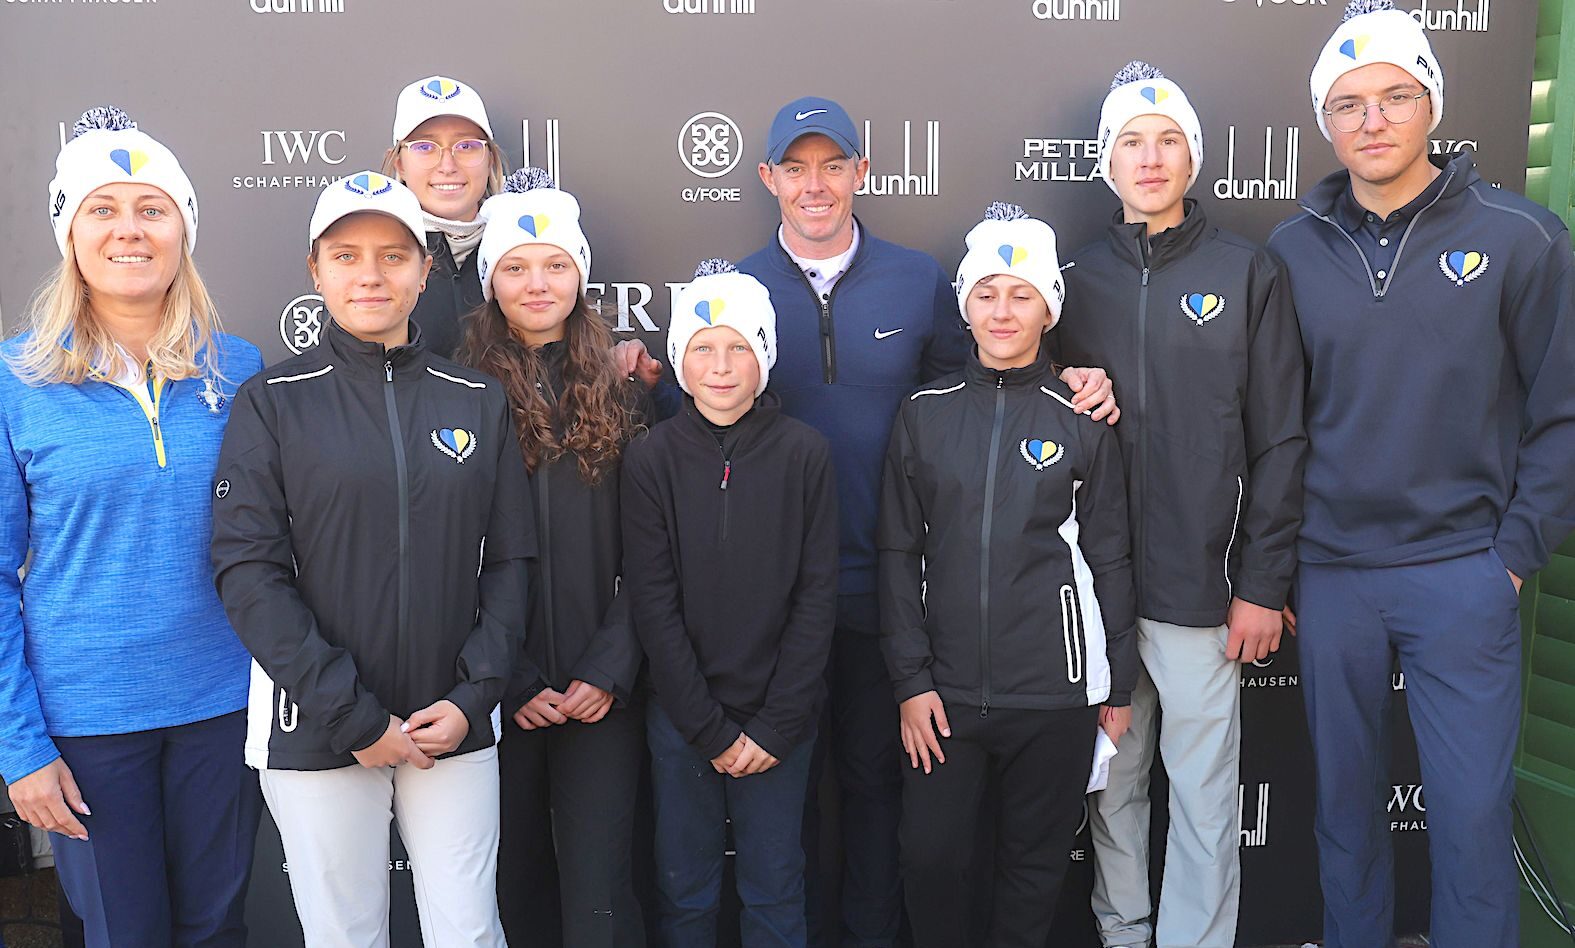 Ukranian juniors get to meet Rory McIlroy at St Andrews